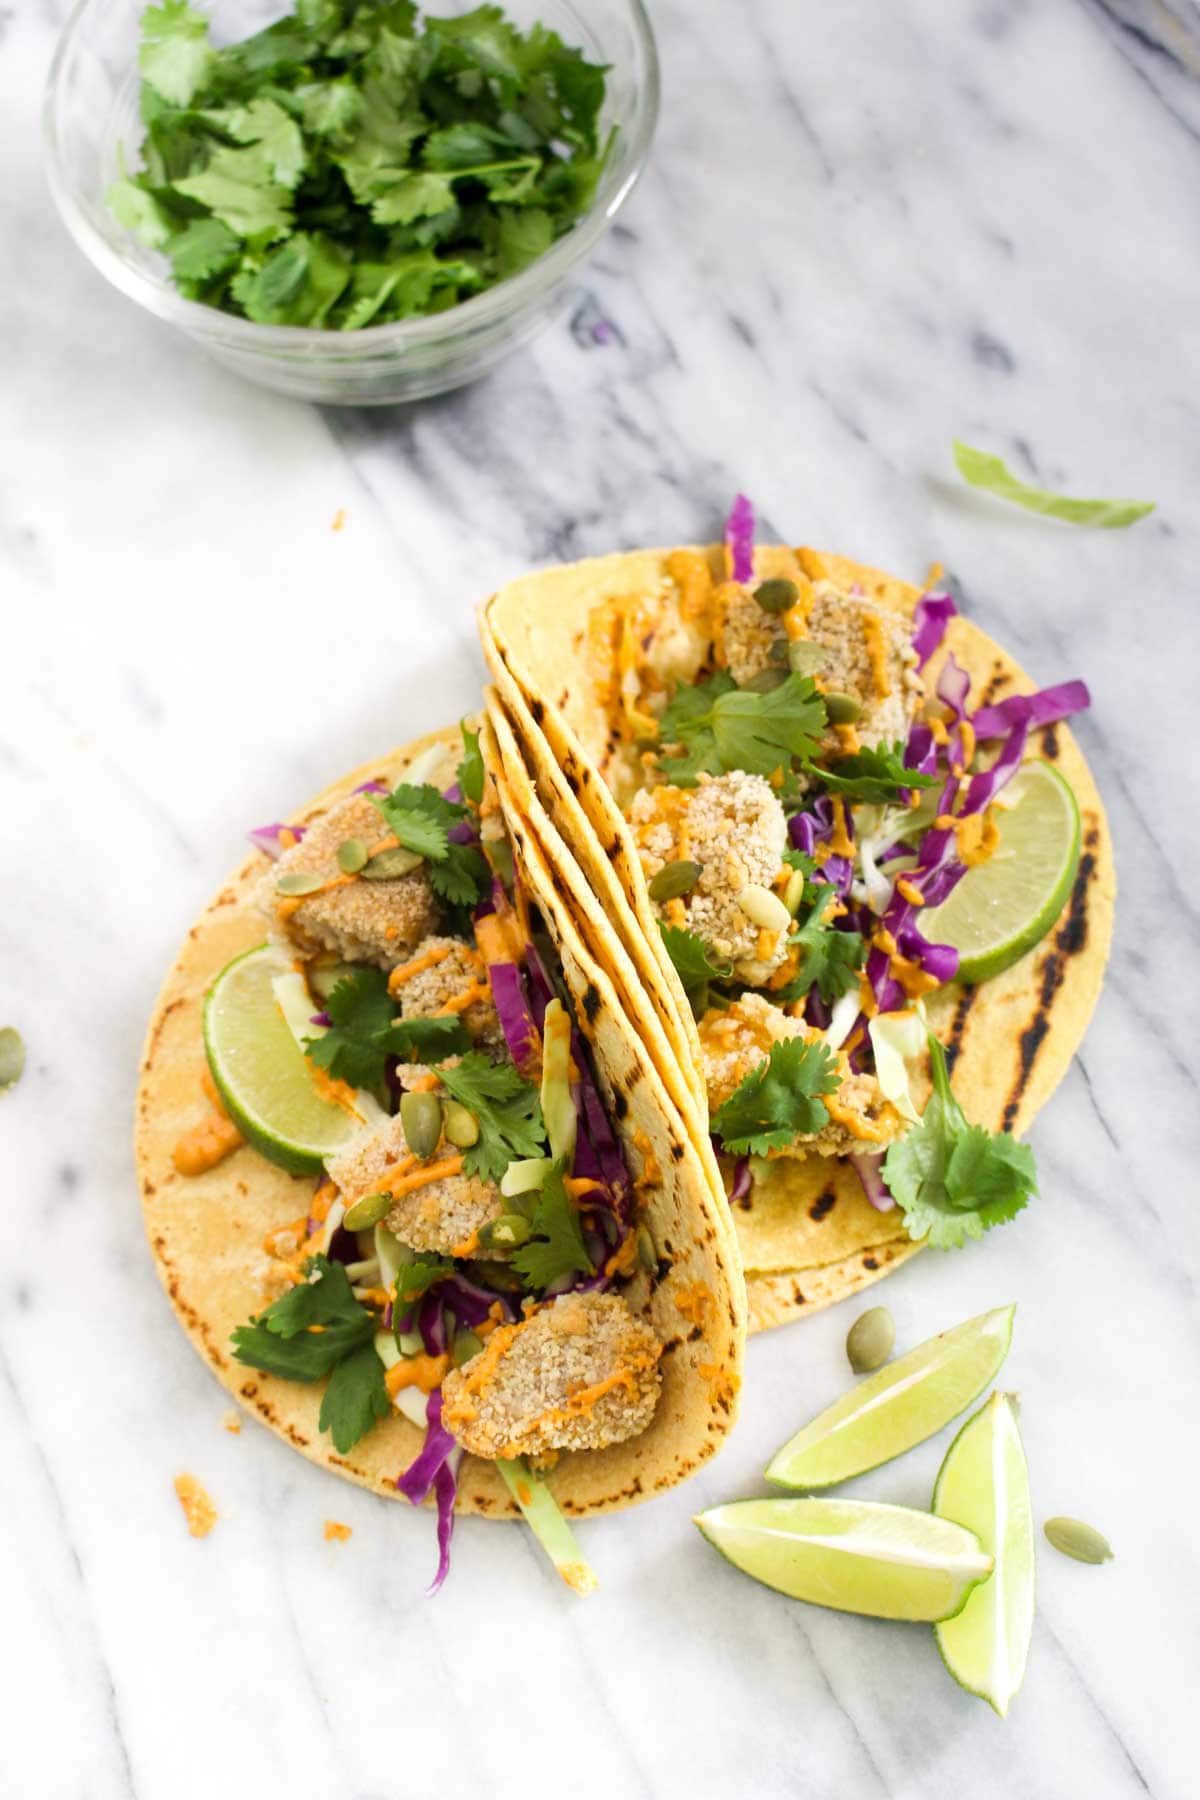 These Crispy Pumpkin Tacos will spice up taco Tuesday with their smokey Chipotle Lime Crema. This recipe is vegan, gluten free, and healthy! | CatchingSeeds.com